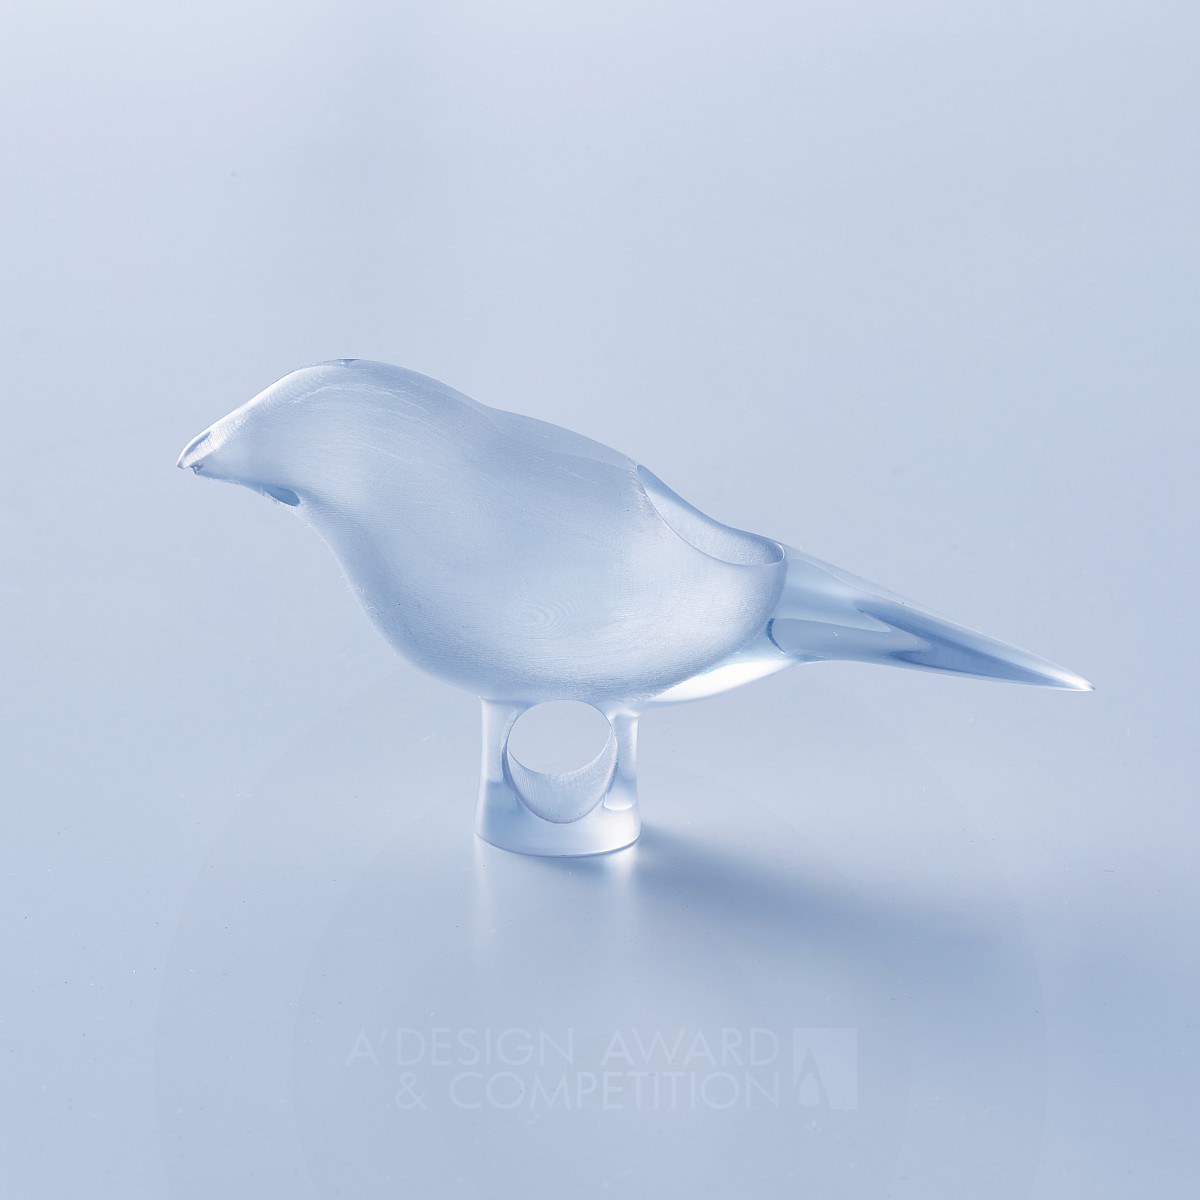 Bird's Sake Cup Cup to Refrain from Drinking by kenji fujii